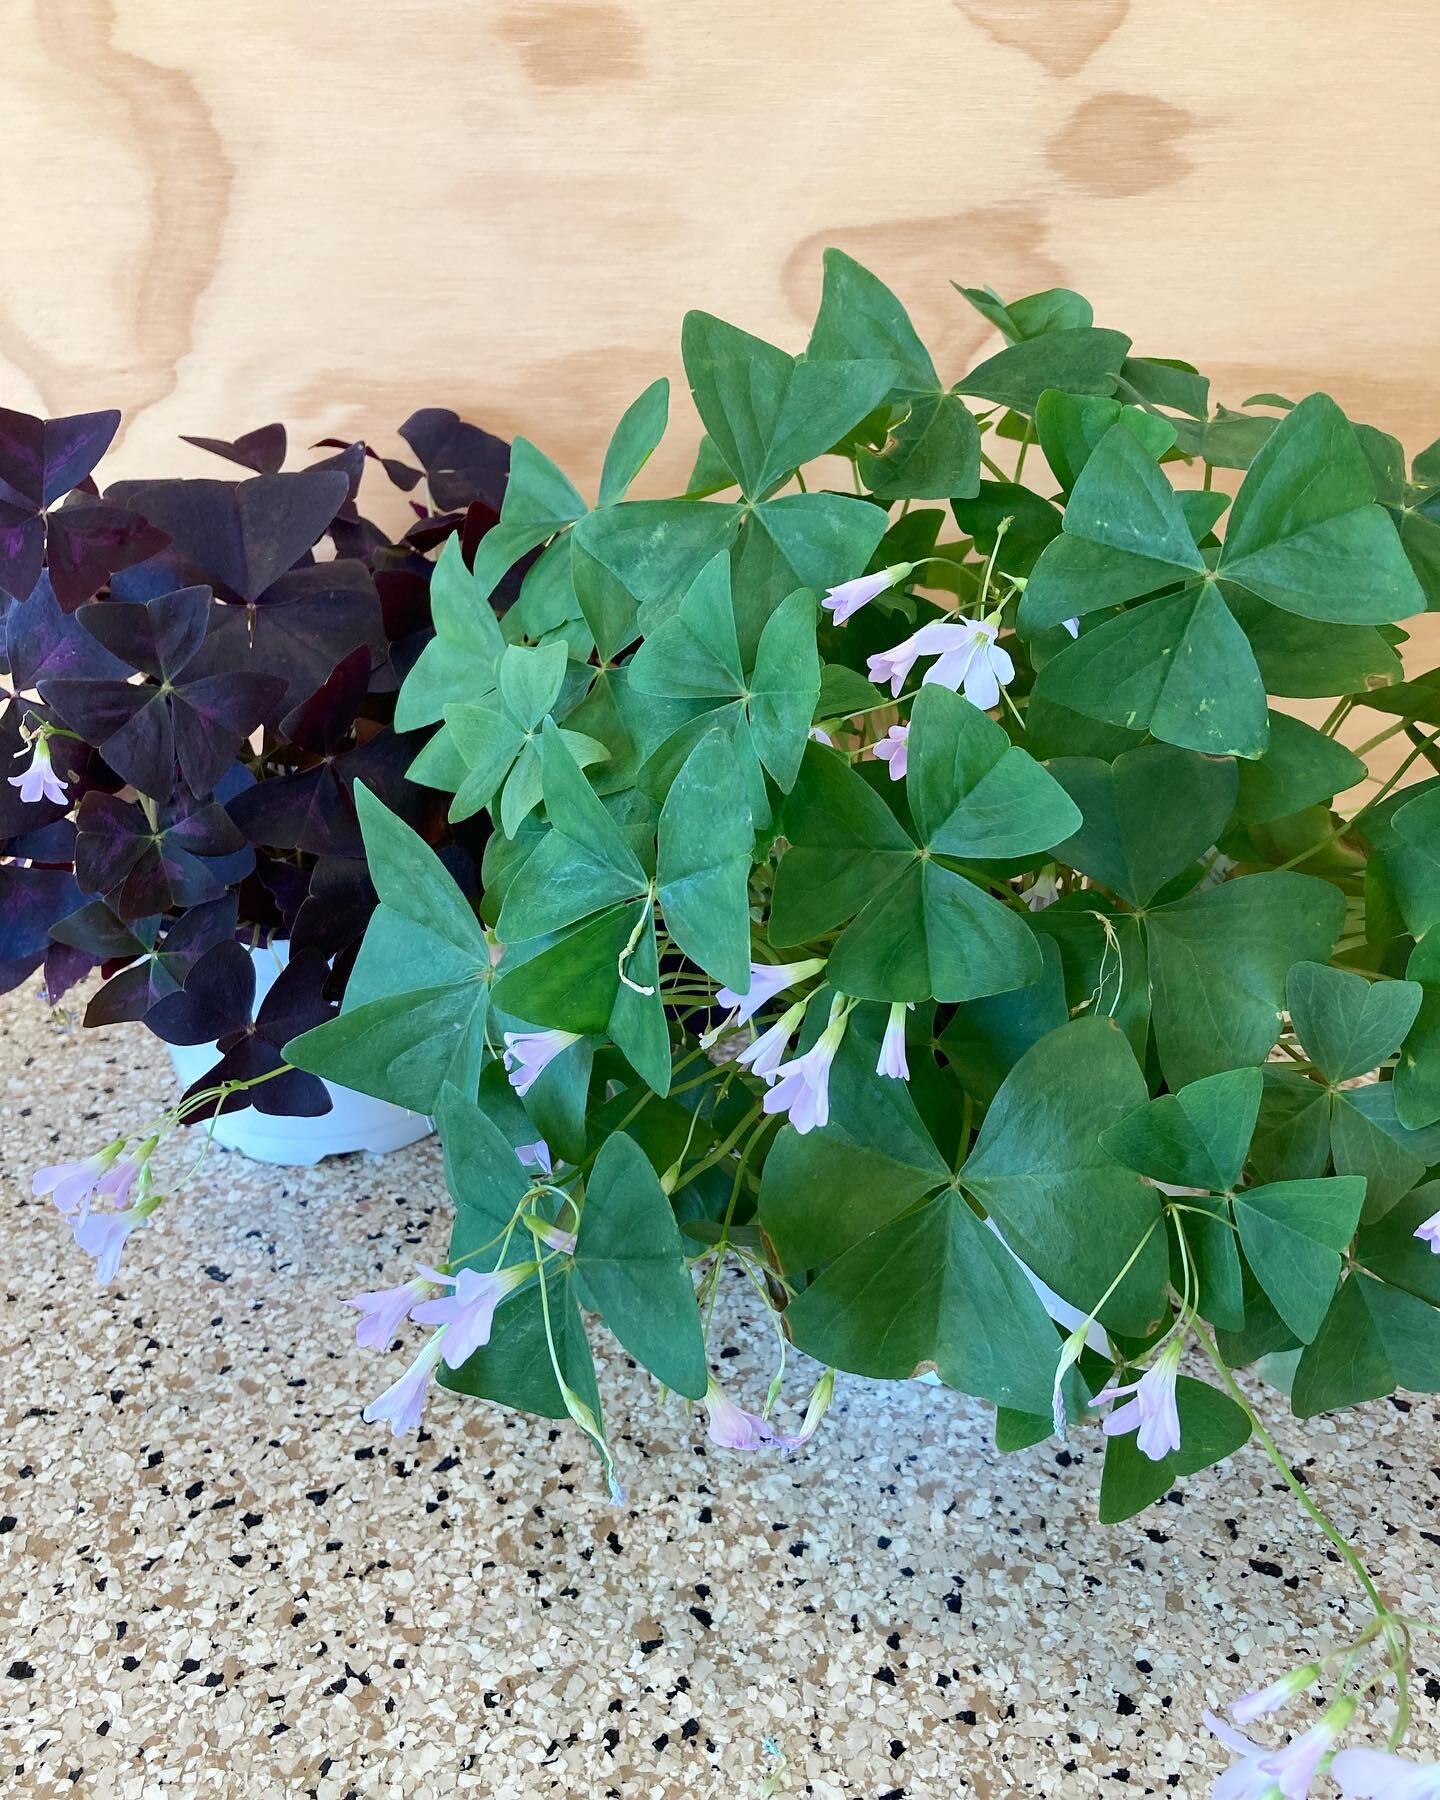 Happy Saint Patrick&rsquo;s Day! Come grab a shamrock for good luck 🍀 
Open 11-4 

#shamrock #saintpatricksday #stpatricksday #sunday #sundayfunday #sundayshopping #oxalis